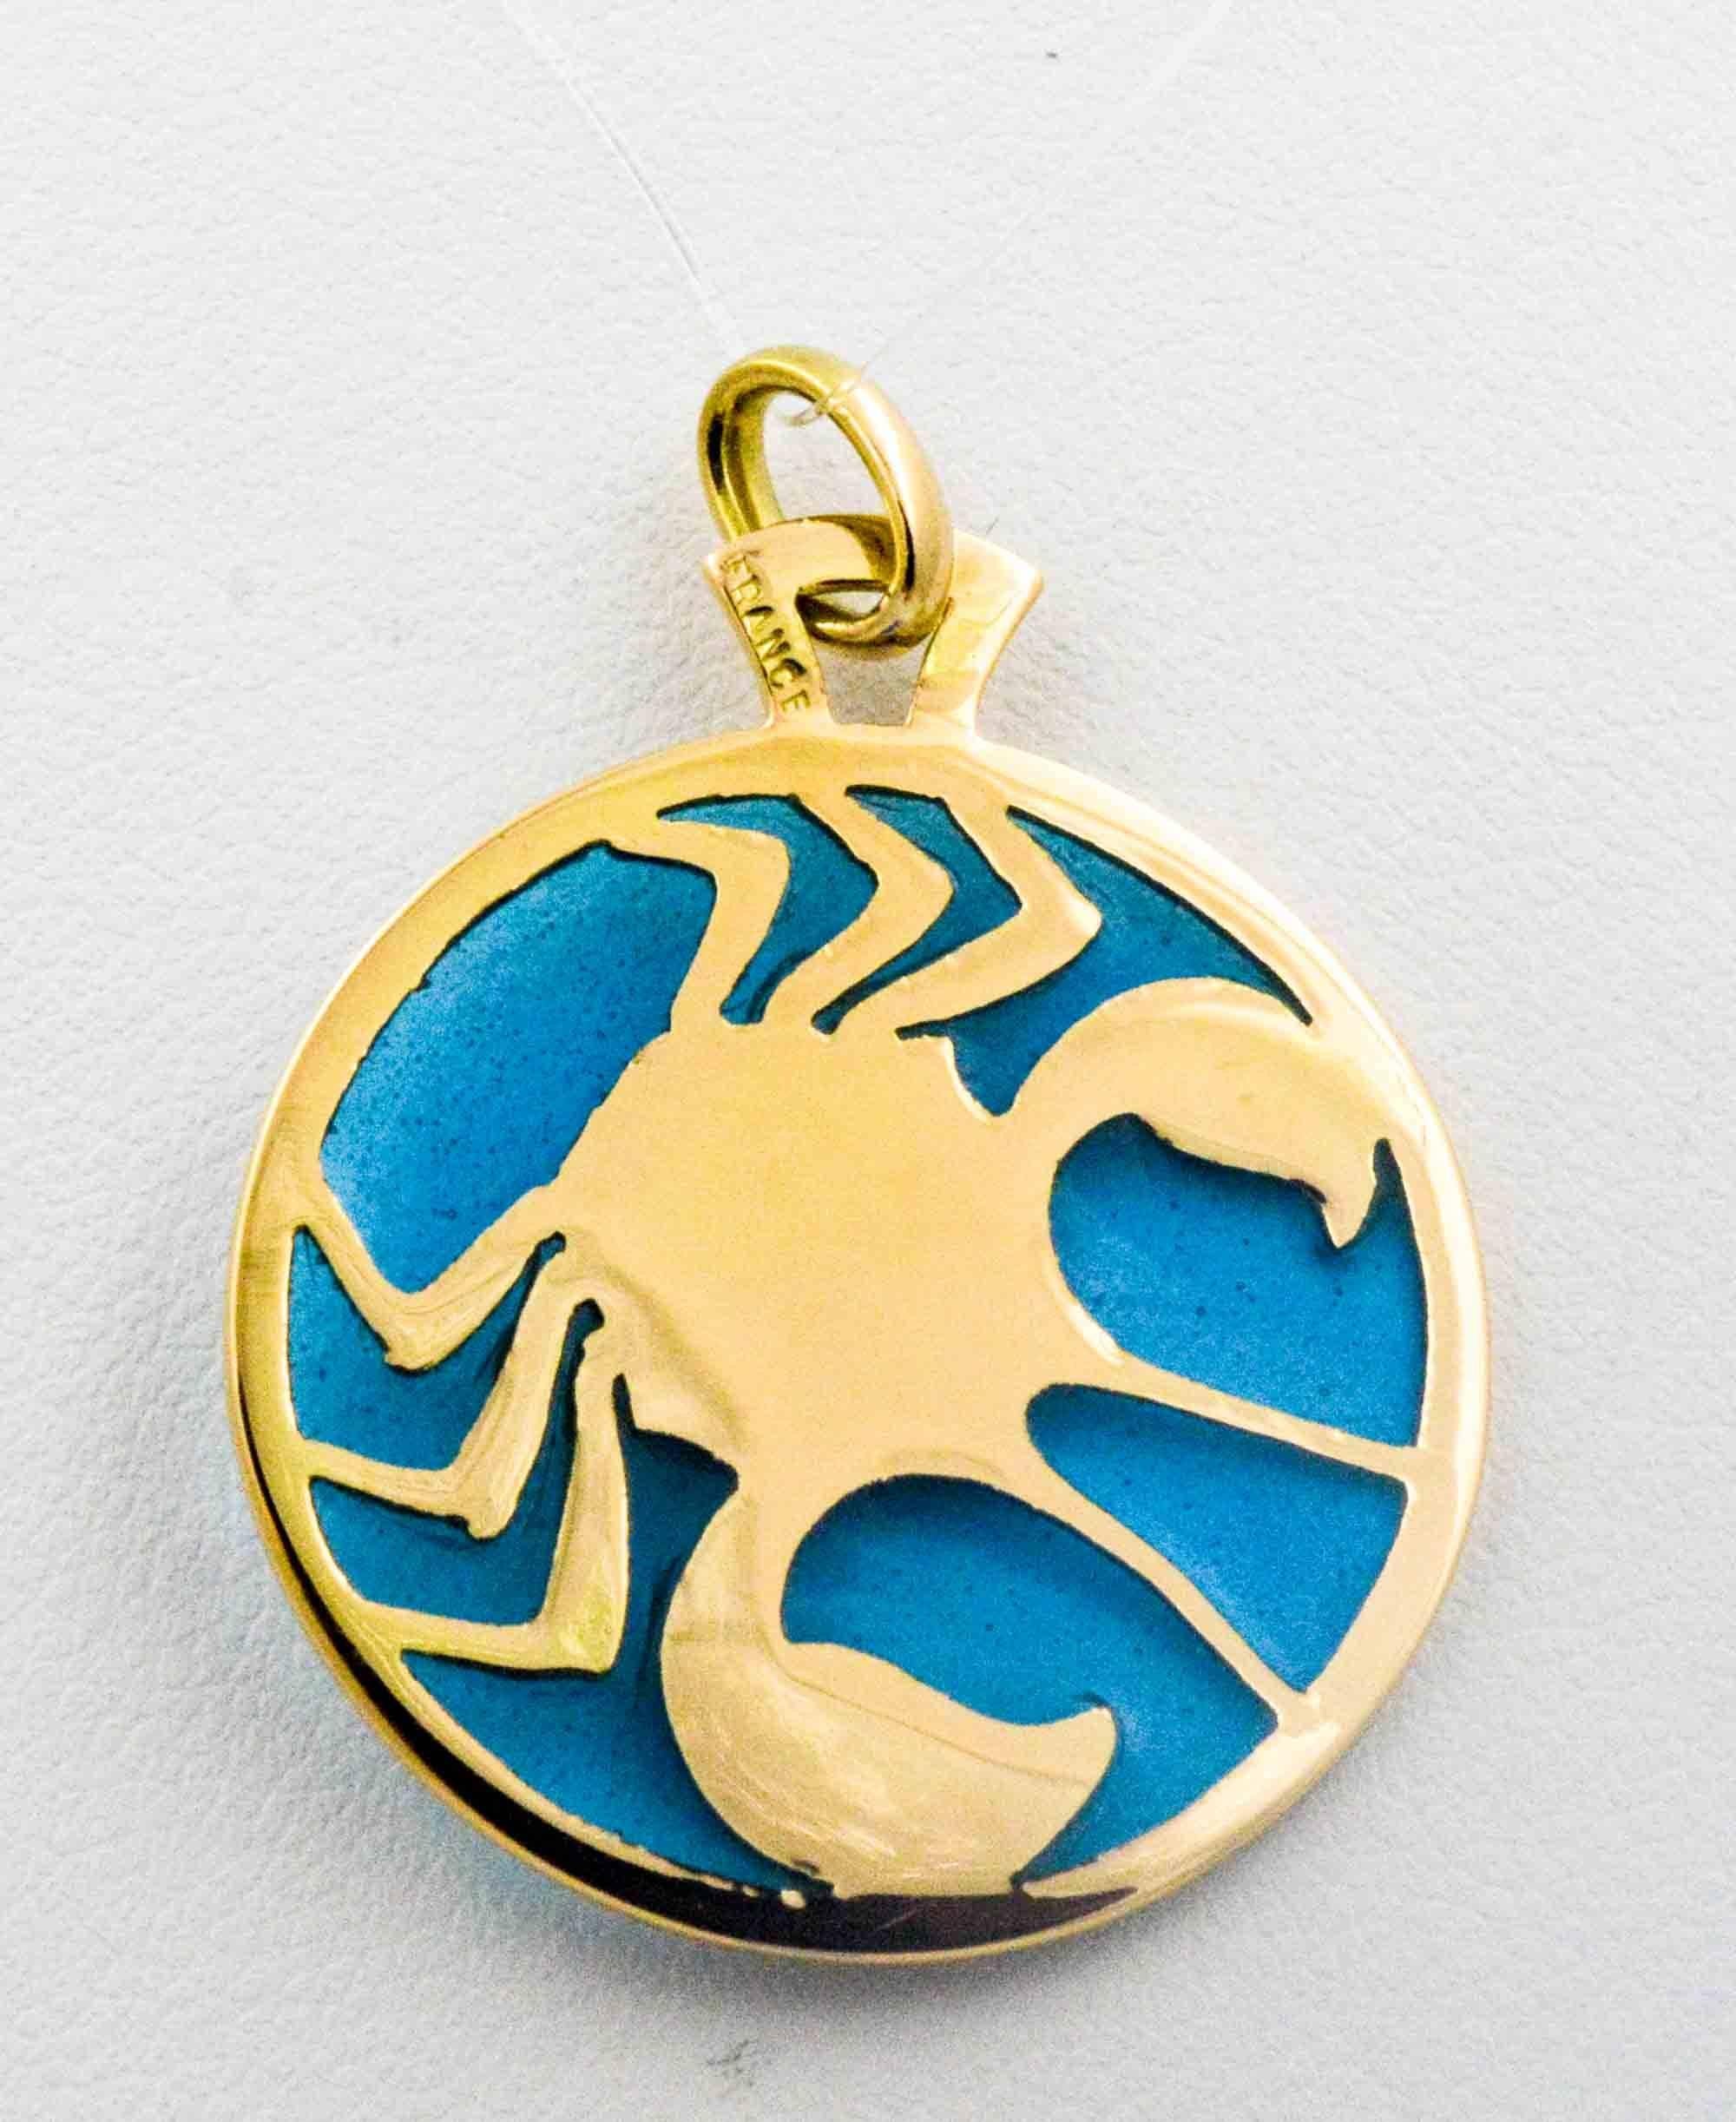 On a background of blue enameled glass is featured the Cancer zodiac sign. Cancer is accented with 18 karat yellow gold  and its body is amber enameled glass. The master craftsman expertly created this Plique a Jour handcrafted glass enameling in